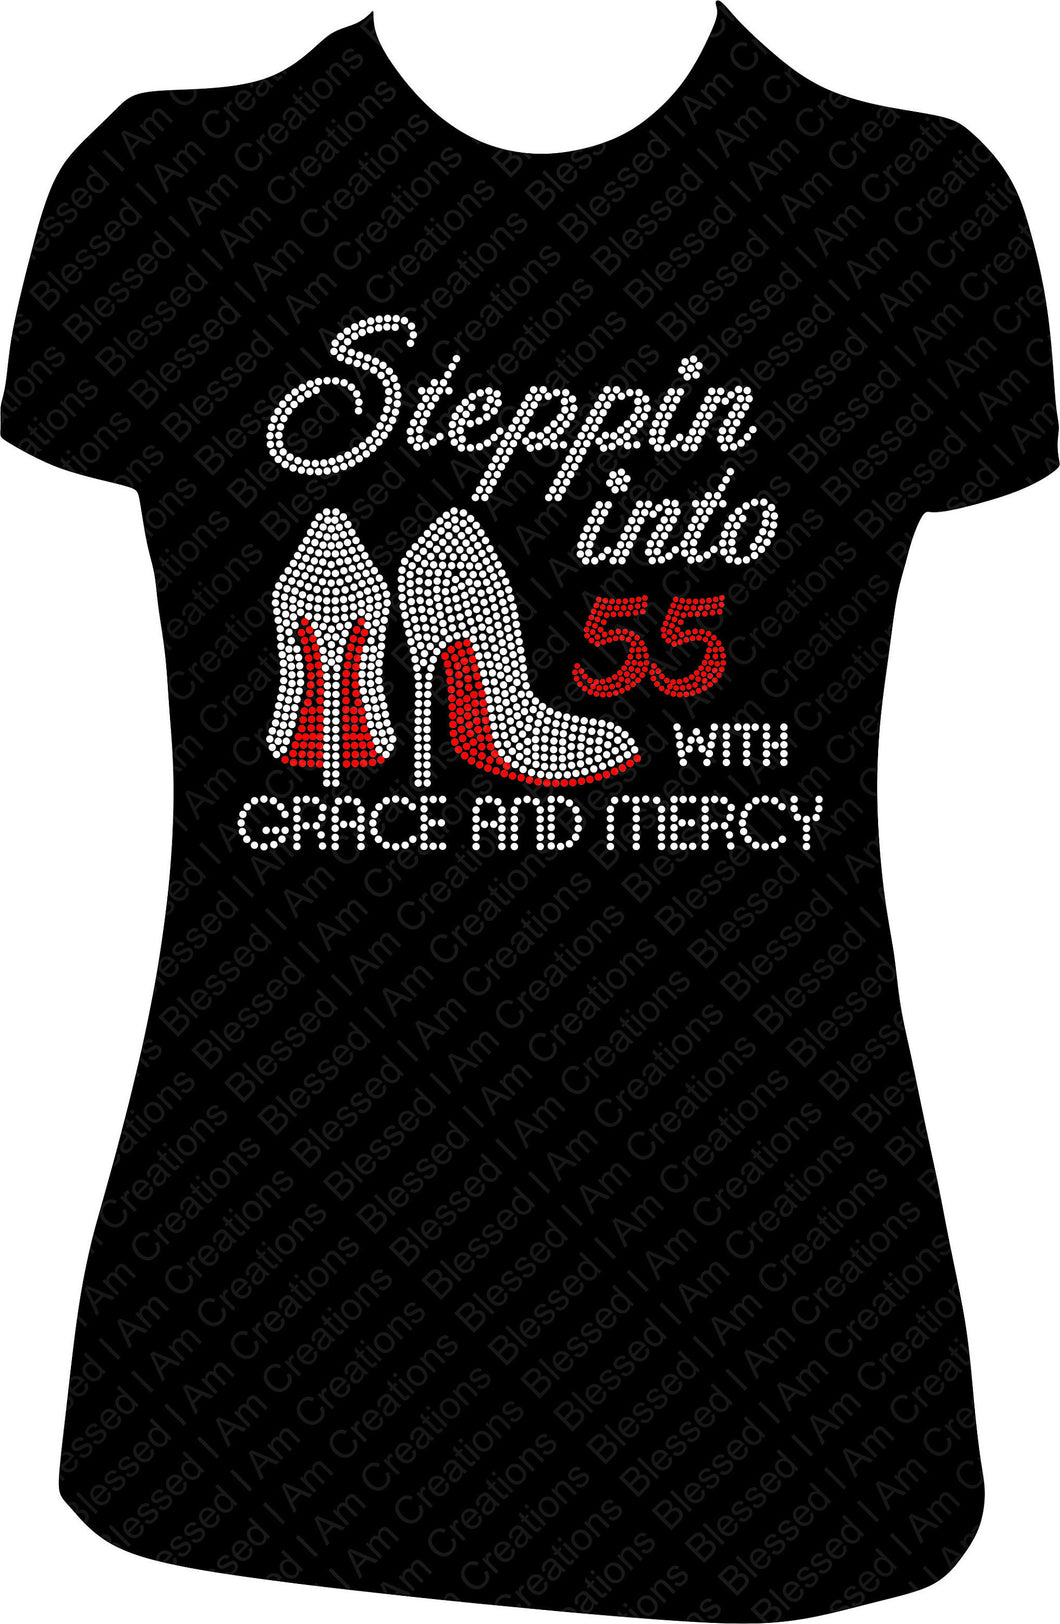 Stepping into 55 with Grace and Mercy Rhinestone Birthday Shirt